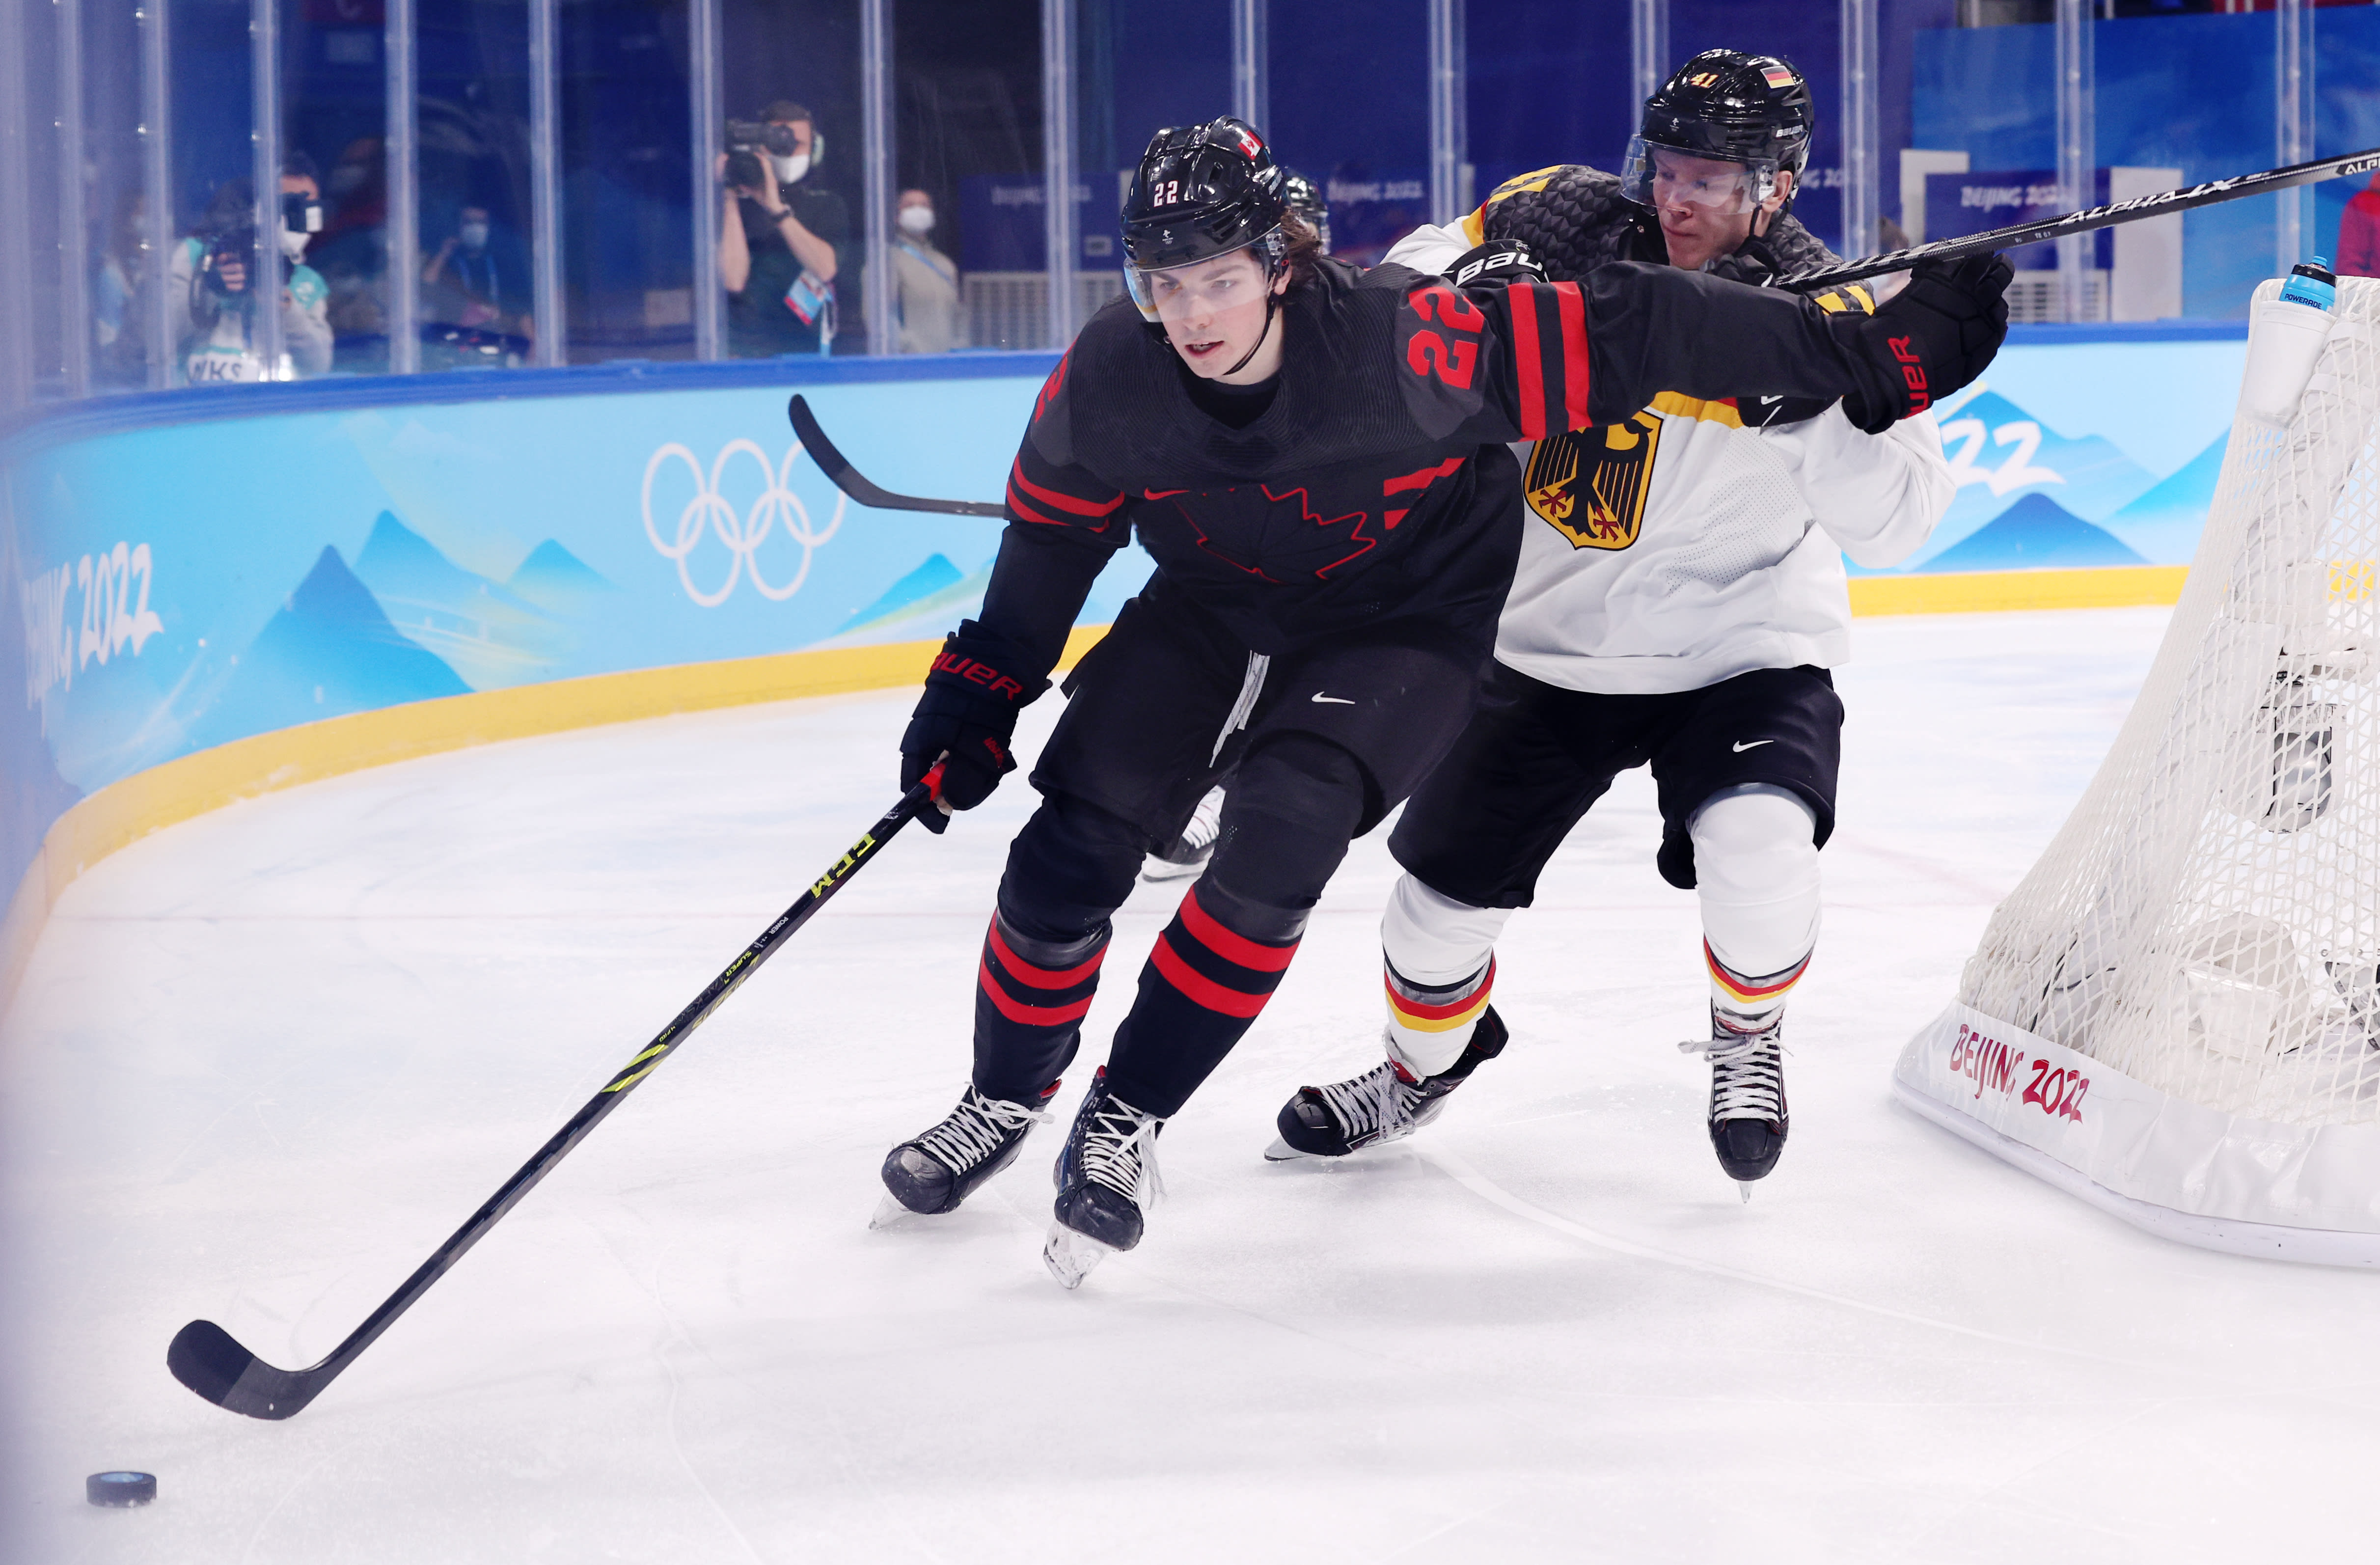 Winter Olympics Ice Hockey: Men's Finals - Preview, Complete Schedule and  How to watch